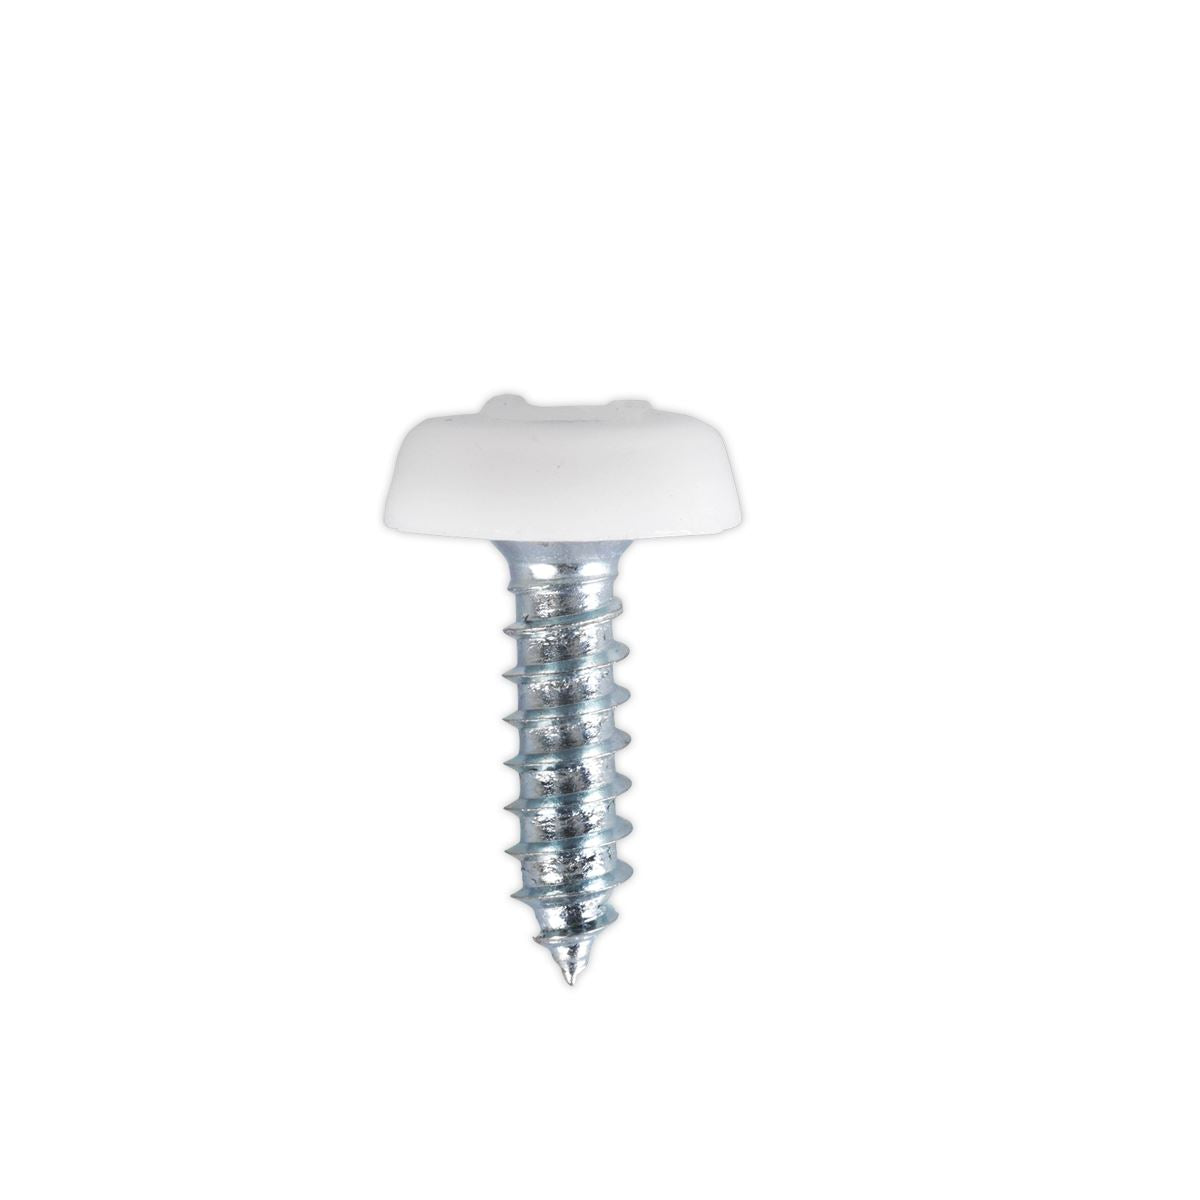 Sealey Numberplate Screw Plastic Enclosed Head 4.8 x 18mm White Pack of 50